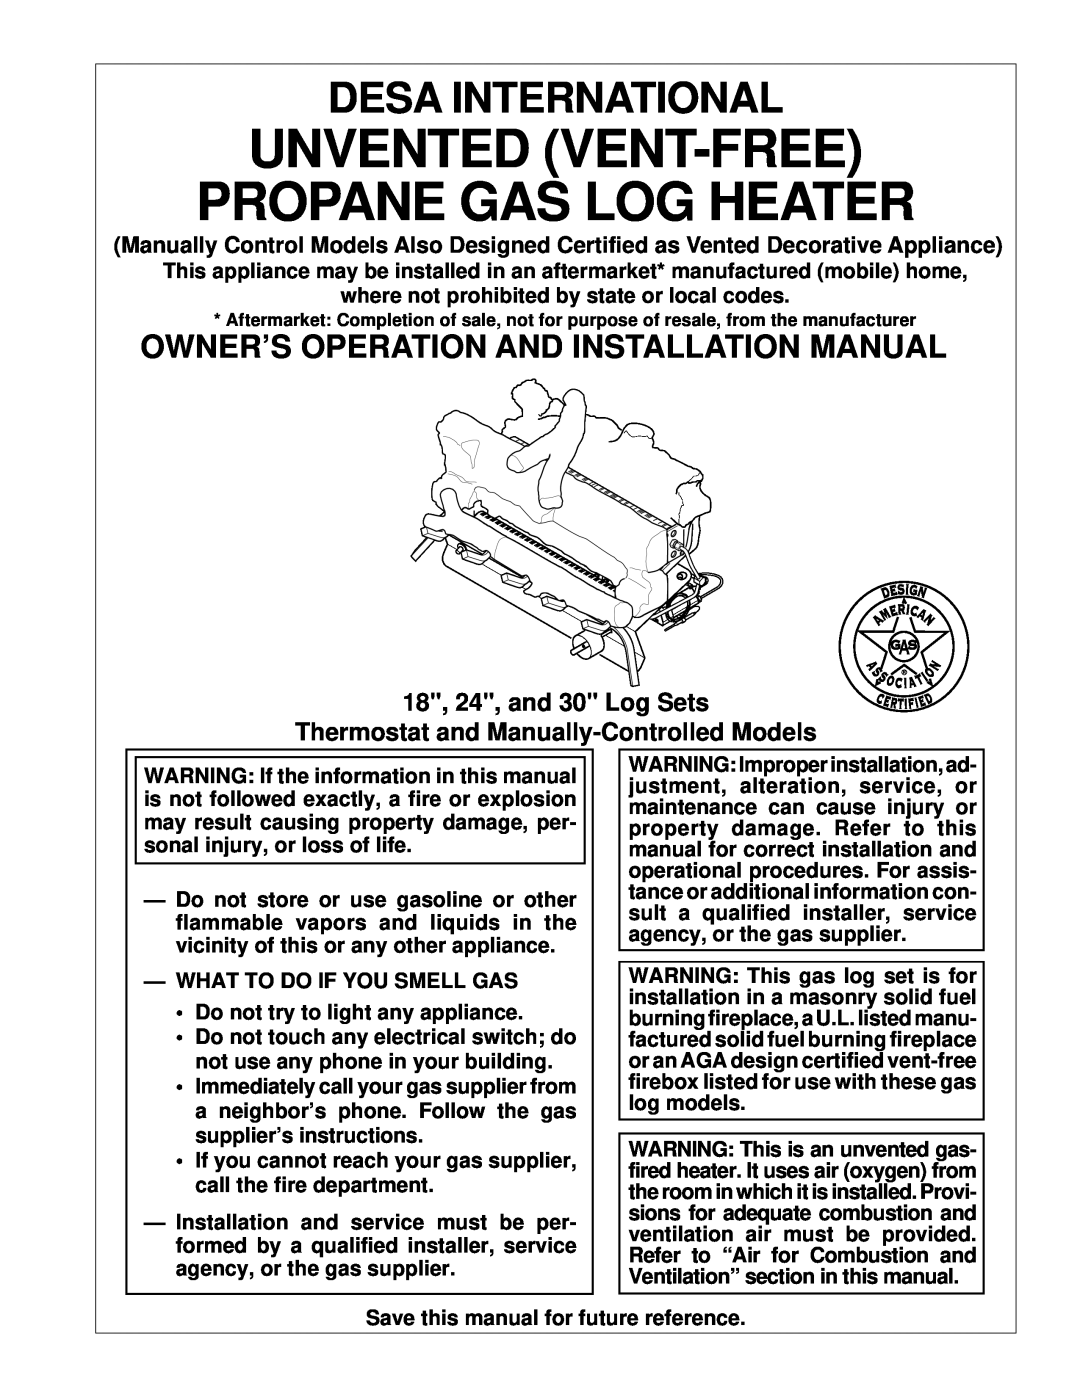 Desa UNVENTED (VENT-FREE) PROPANE GAS LOG HEATER installation manual Owner’S Operation And Installation Manual 